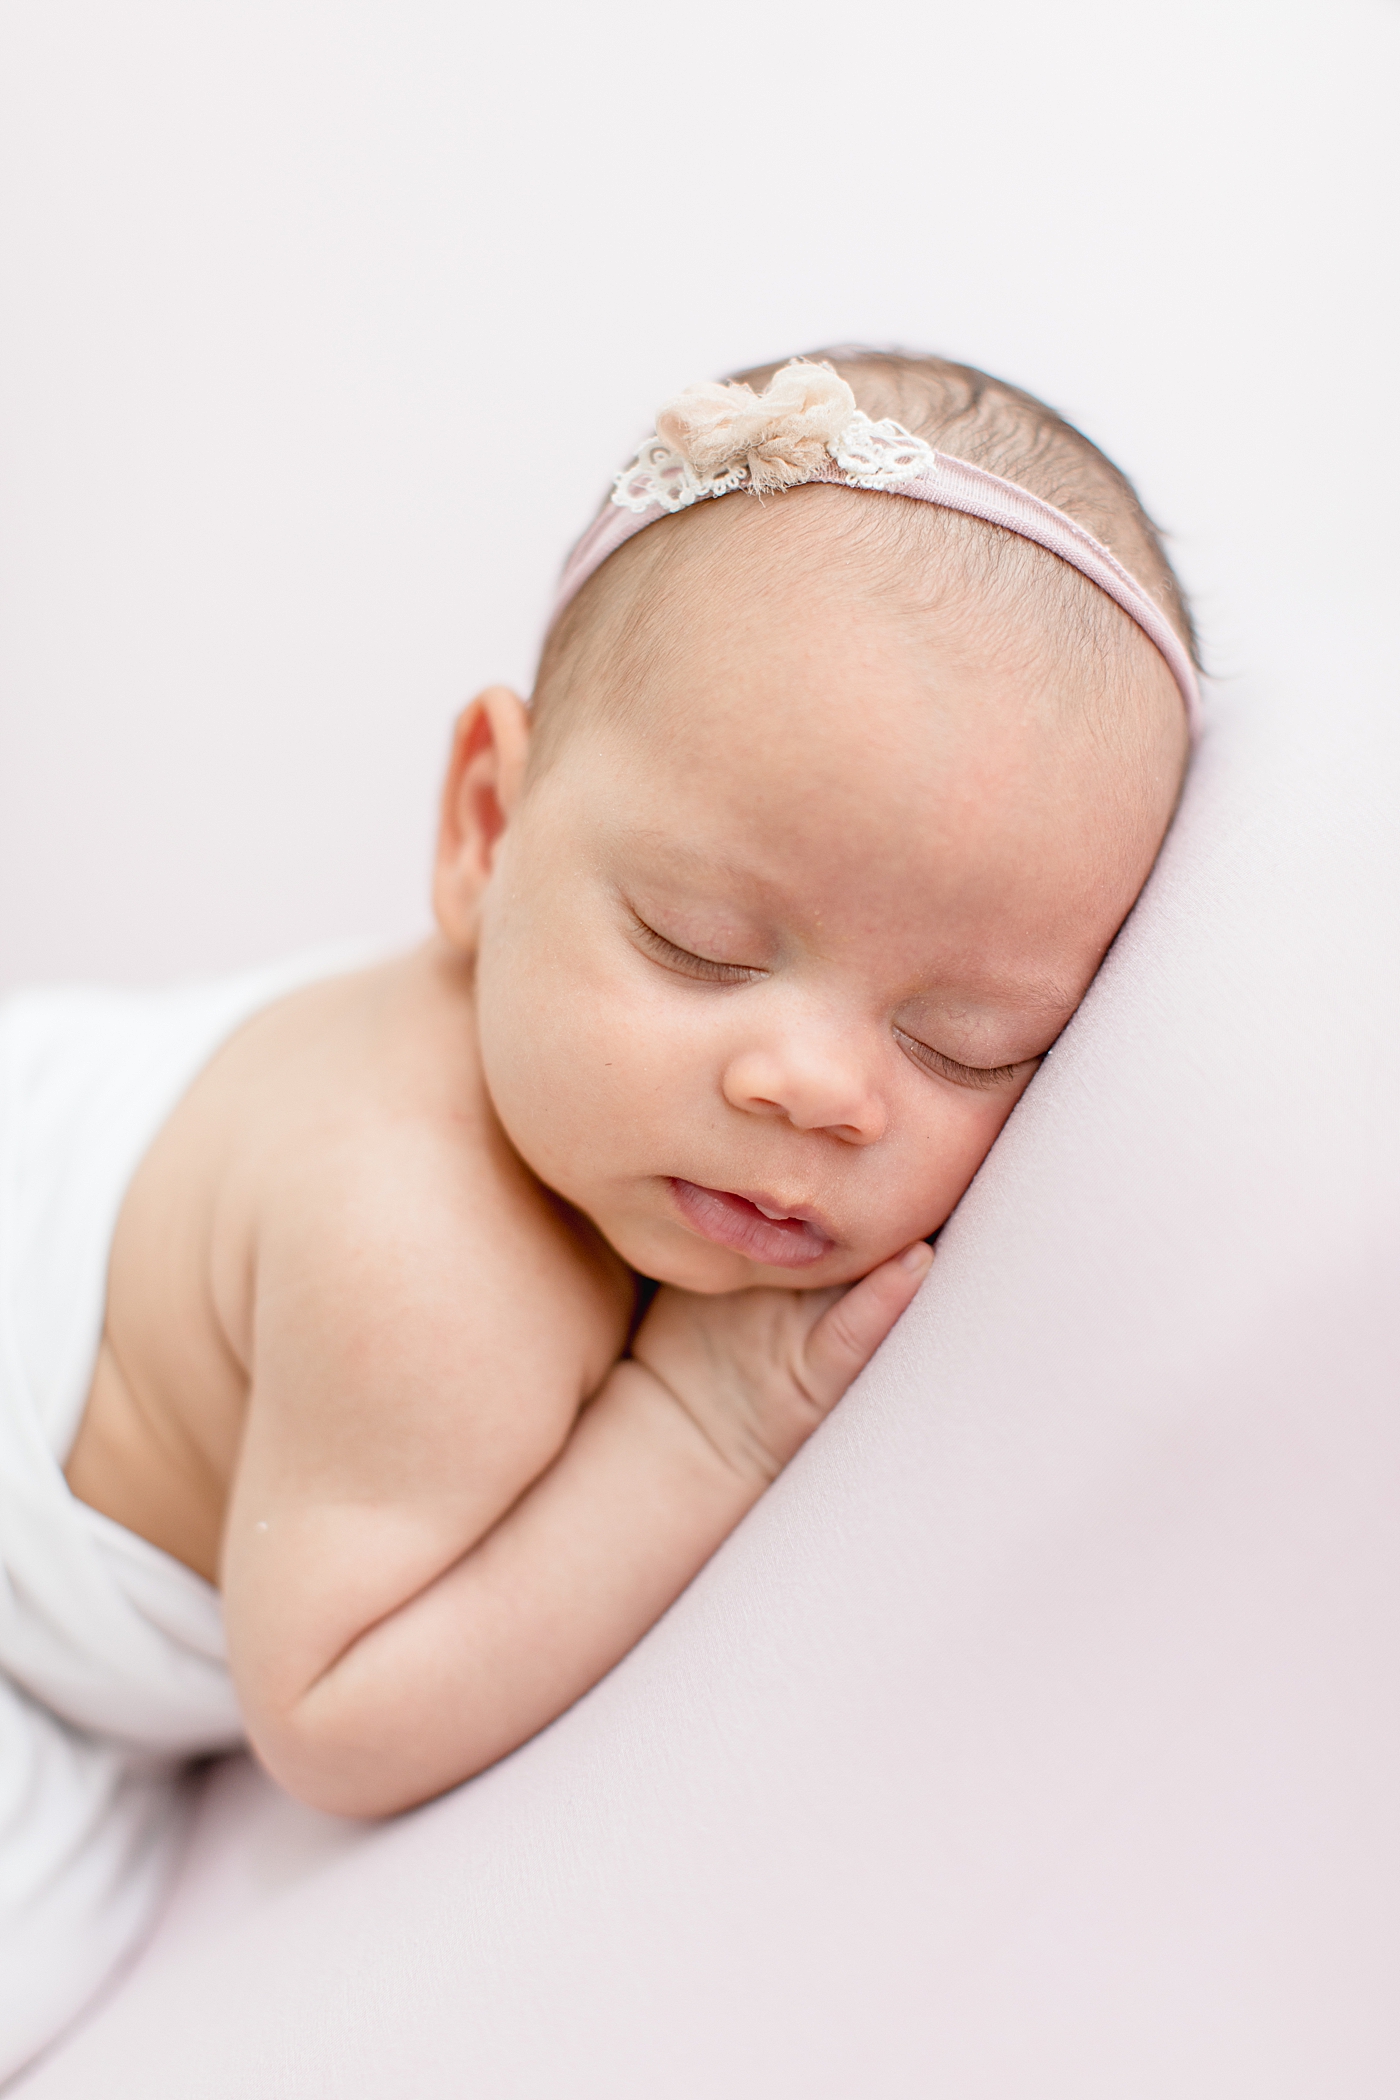 Baby girl sleeping for newborn photos. Photo by Brittany Elise Photography.